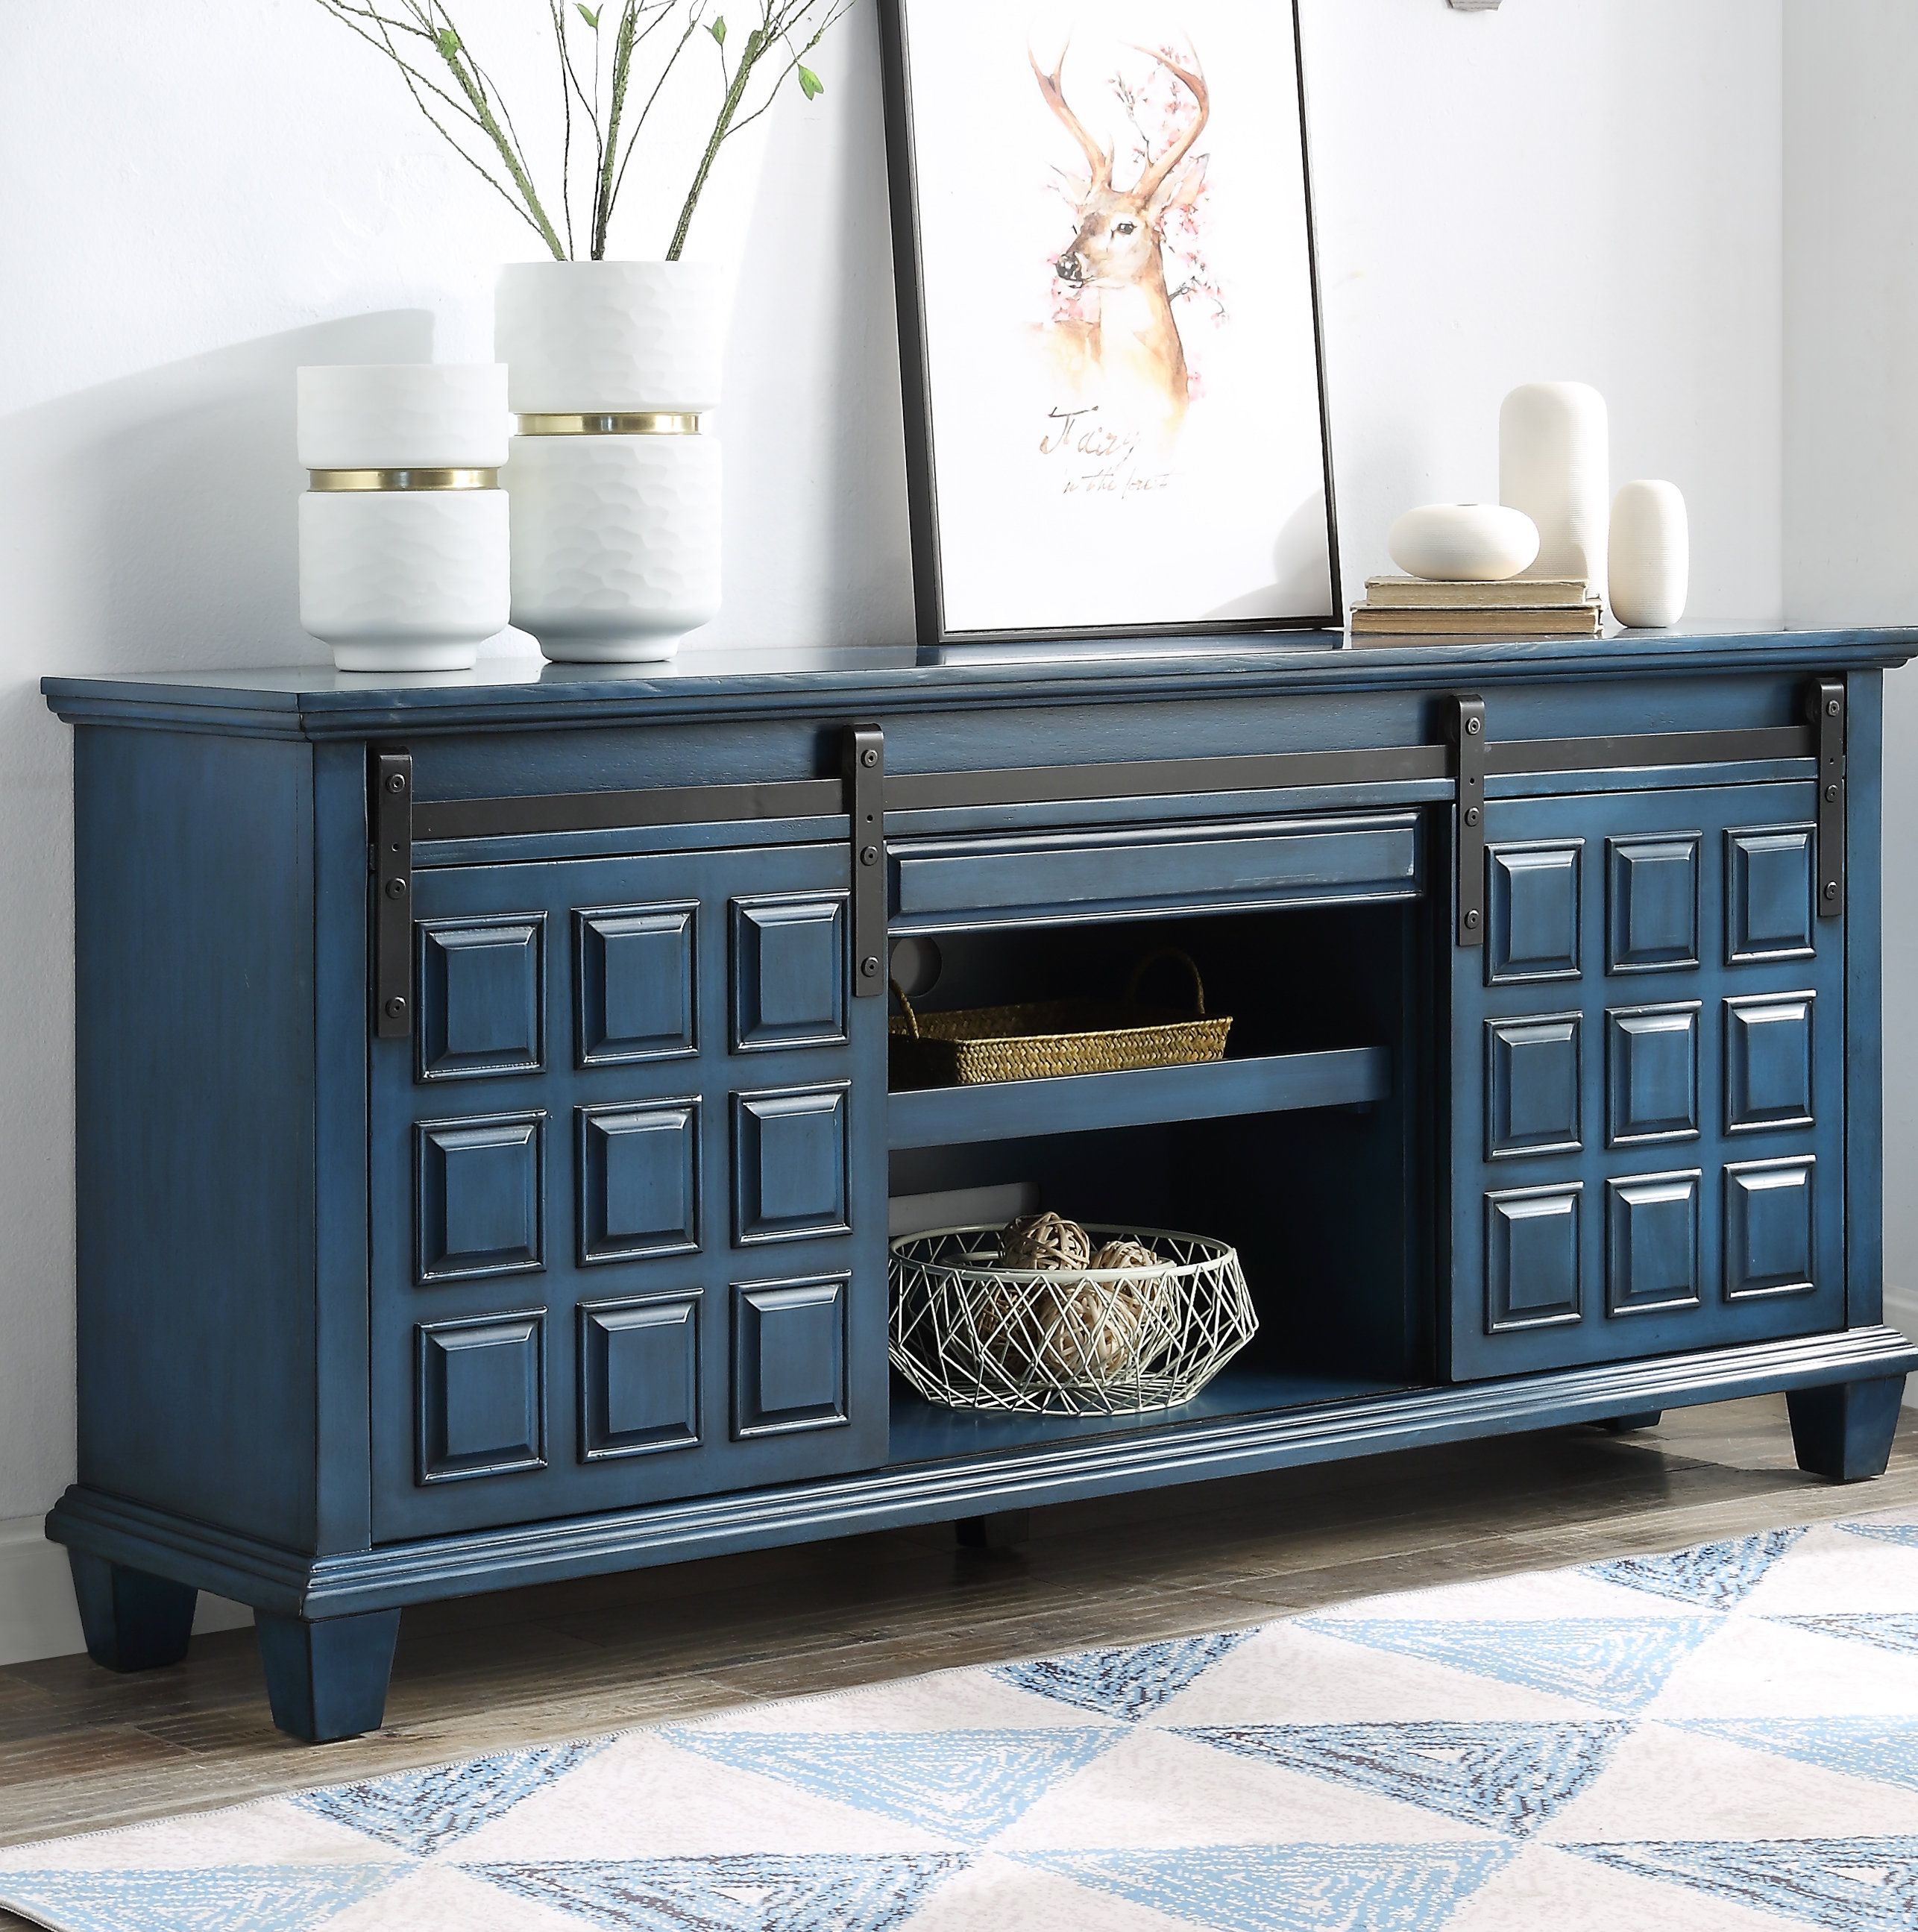 60 Inch Credenza | Wayfair Intended For Most Recent Caines Credenzas (View 16 of 20)